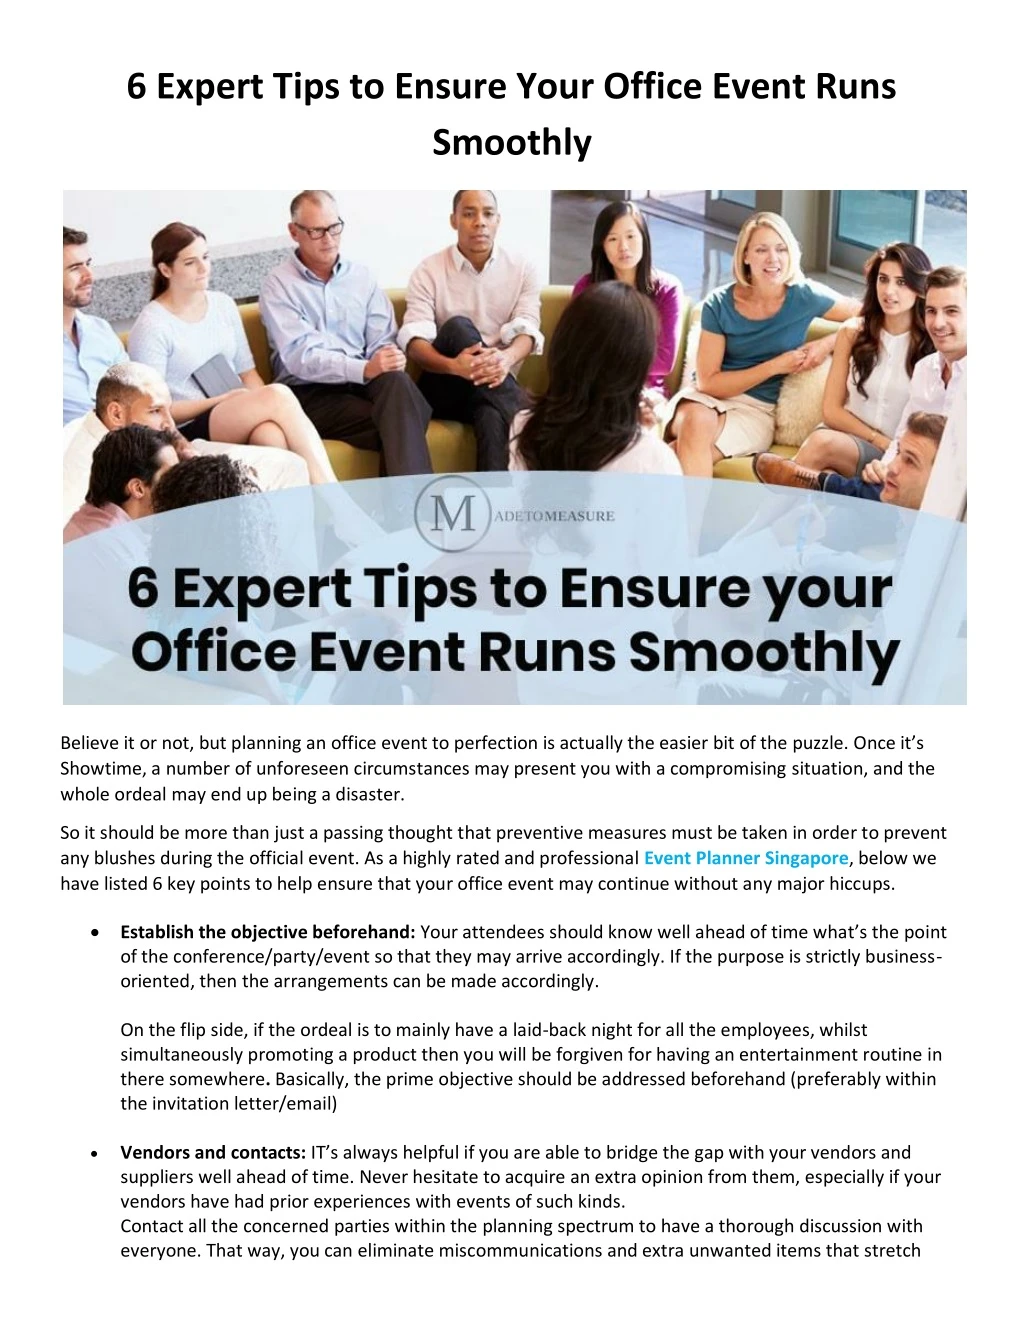 6 expert tips to ensure your office event runs